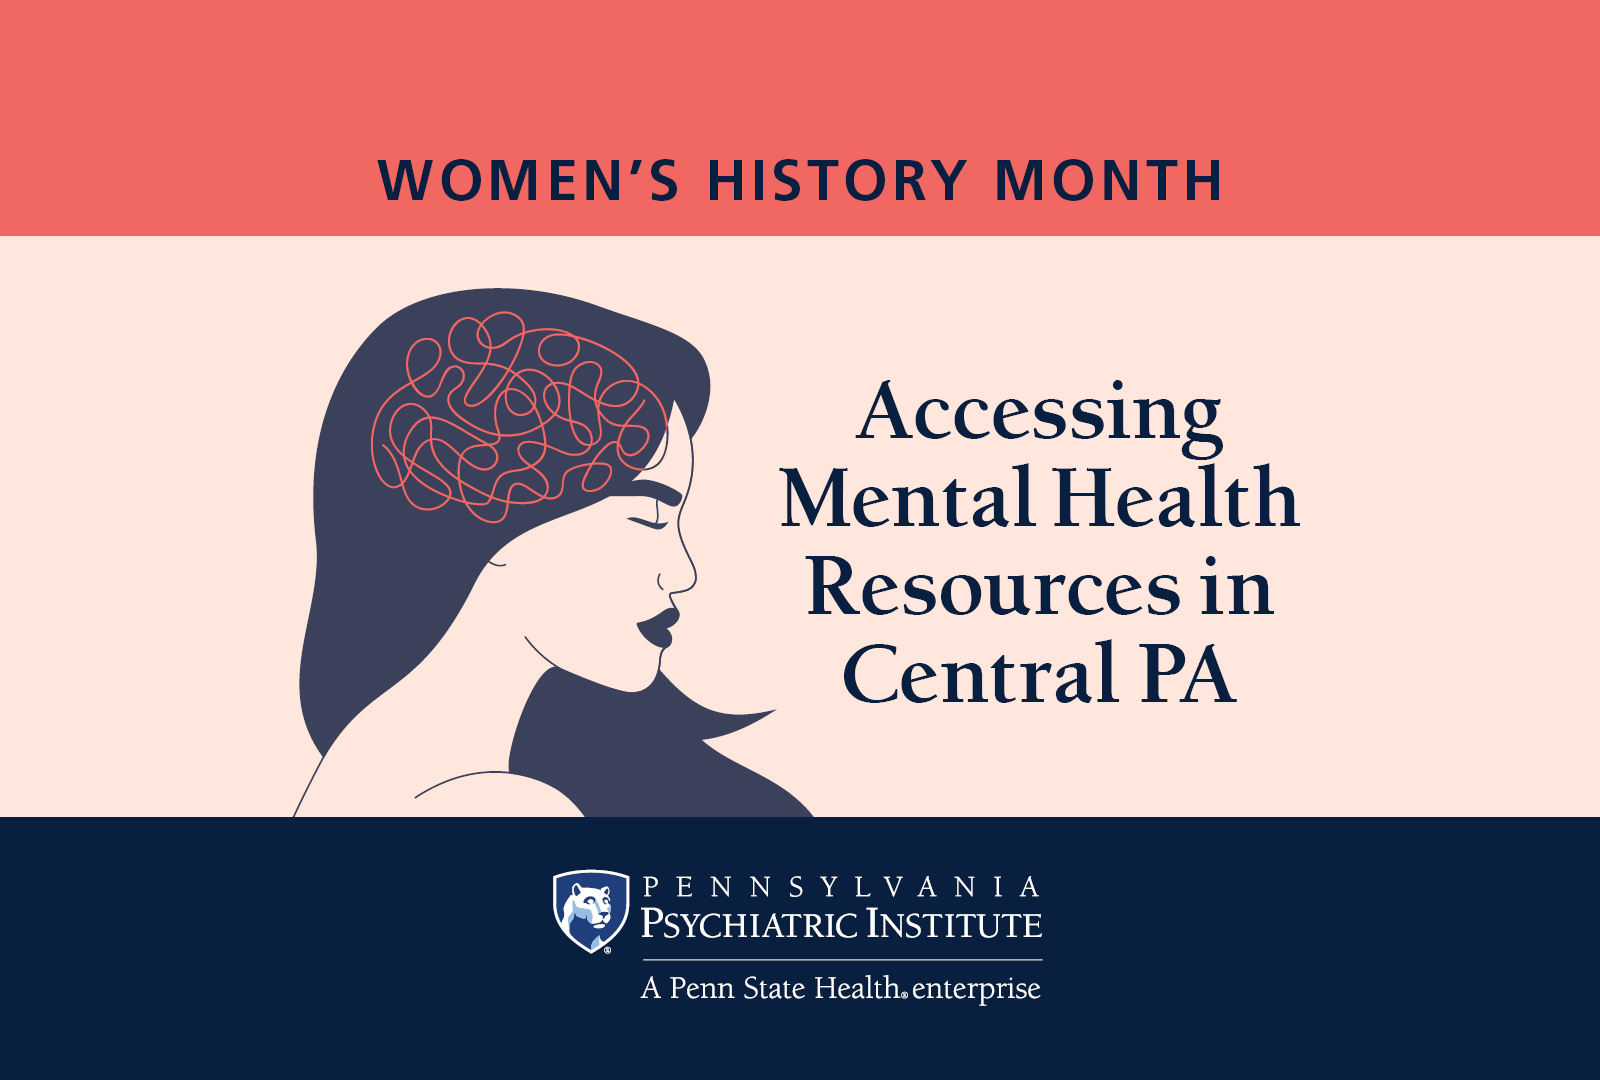 Women's History Month: Accessing Mental Health Resources in Central PA